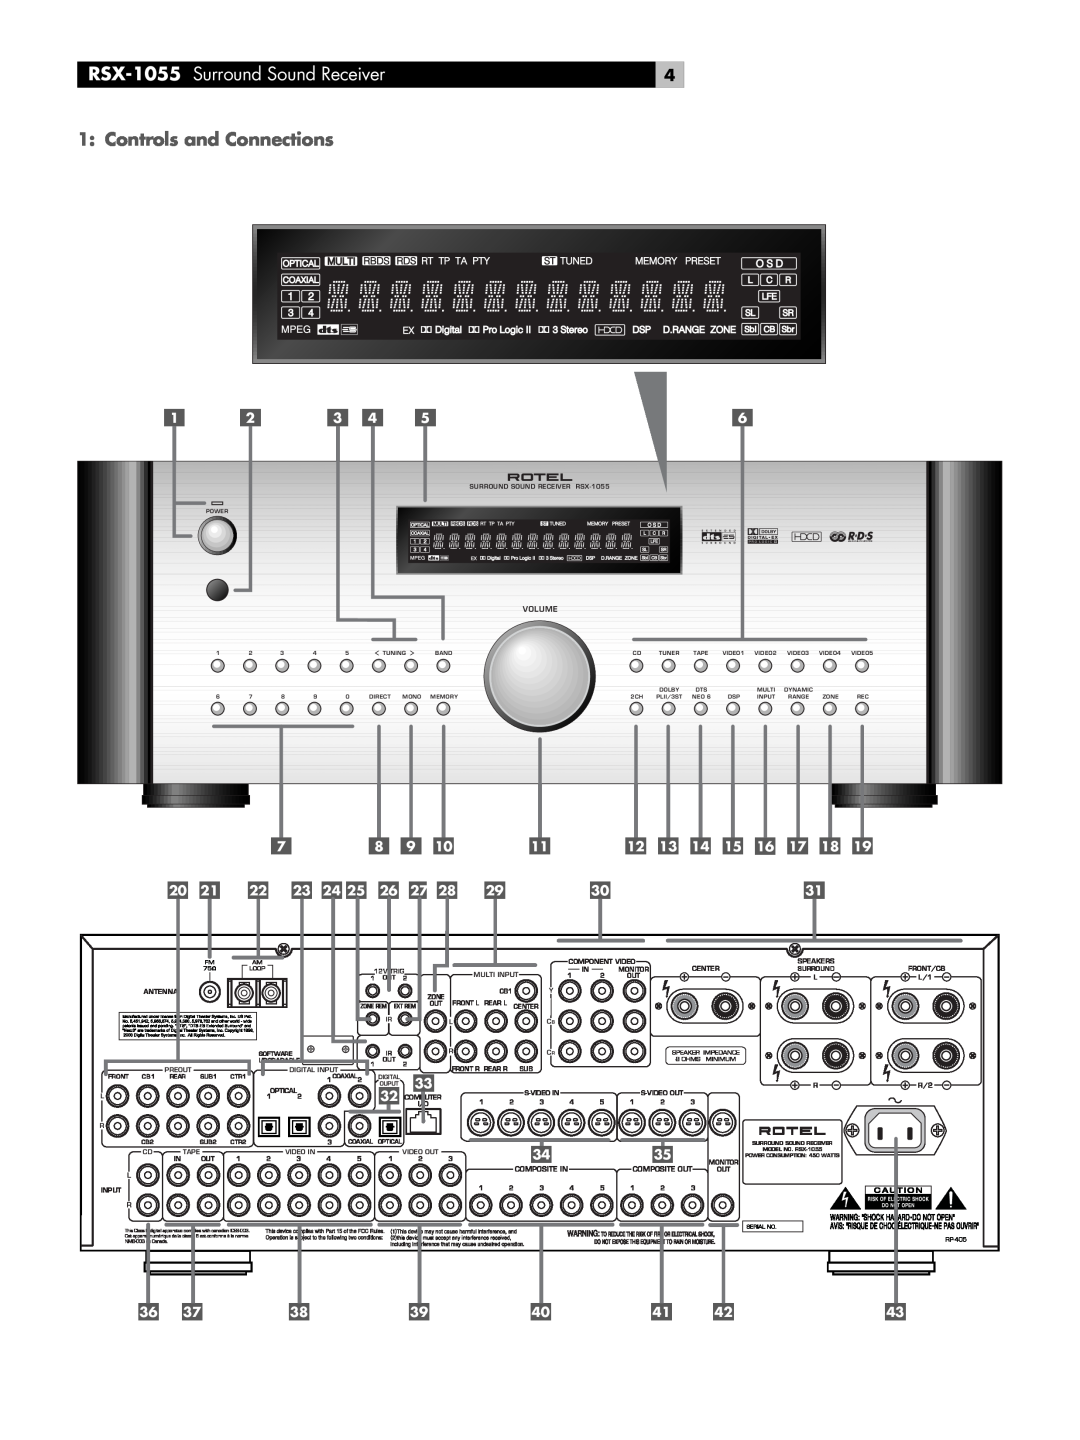 Rotel owner manual RSX-1055 Surround Sound Receiver, Controls and Connections 